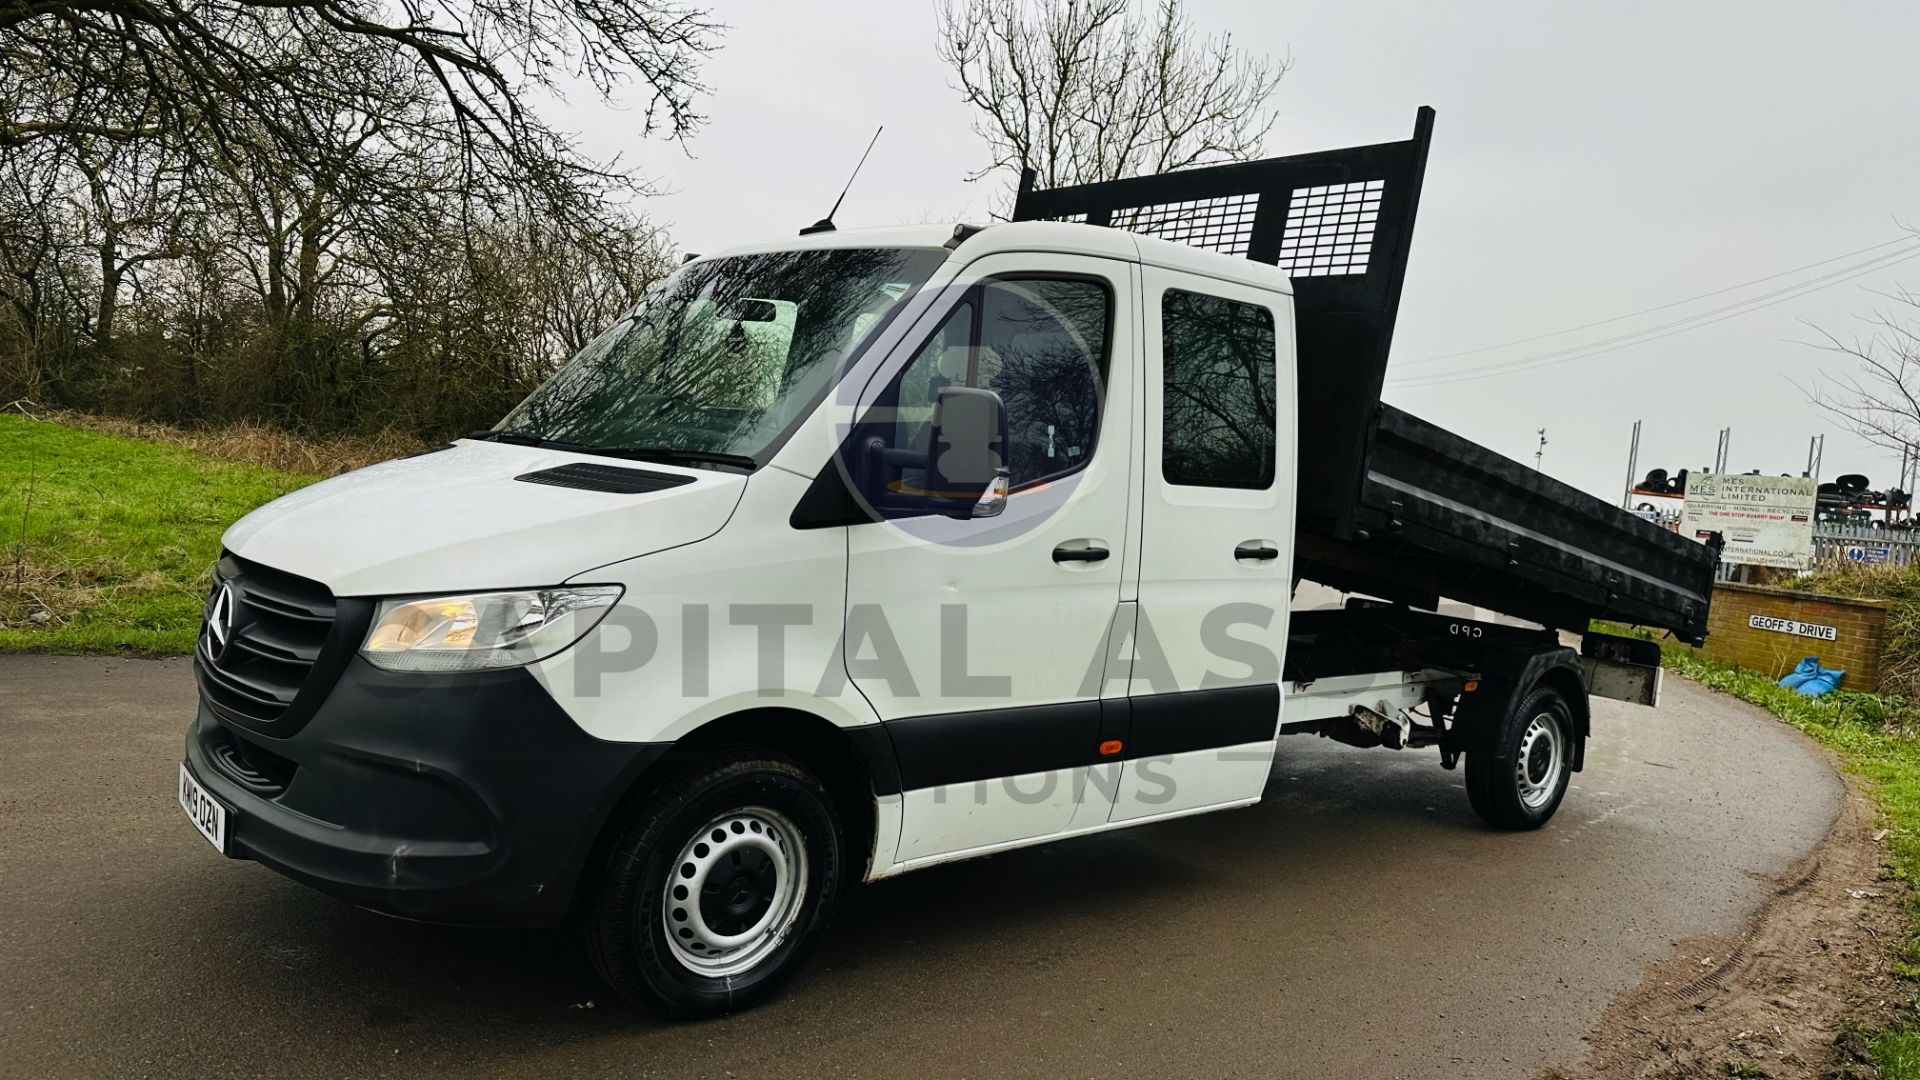 (On Sale) MERCEDES-BENZ SPRINTER 314 CDI *LWB - 7 SEATER D/CAB TIPPER* (2019 - NEW MODEL) *EURO 6* - Image 9 of 38